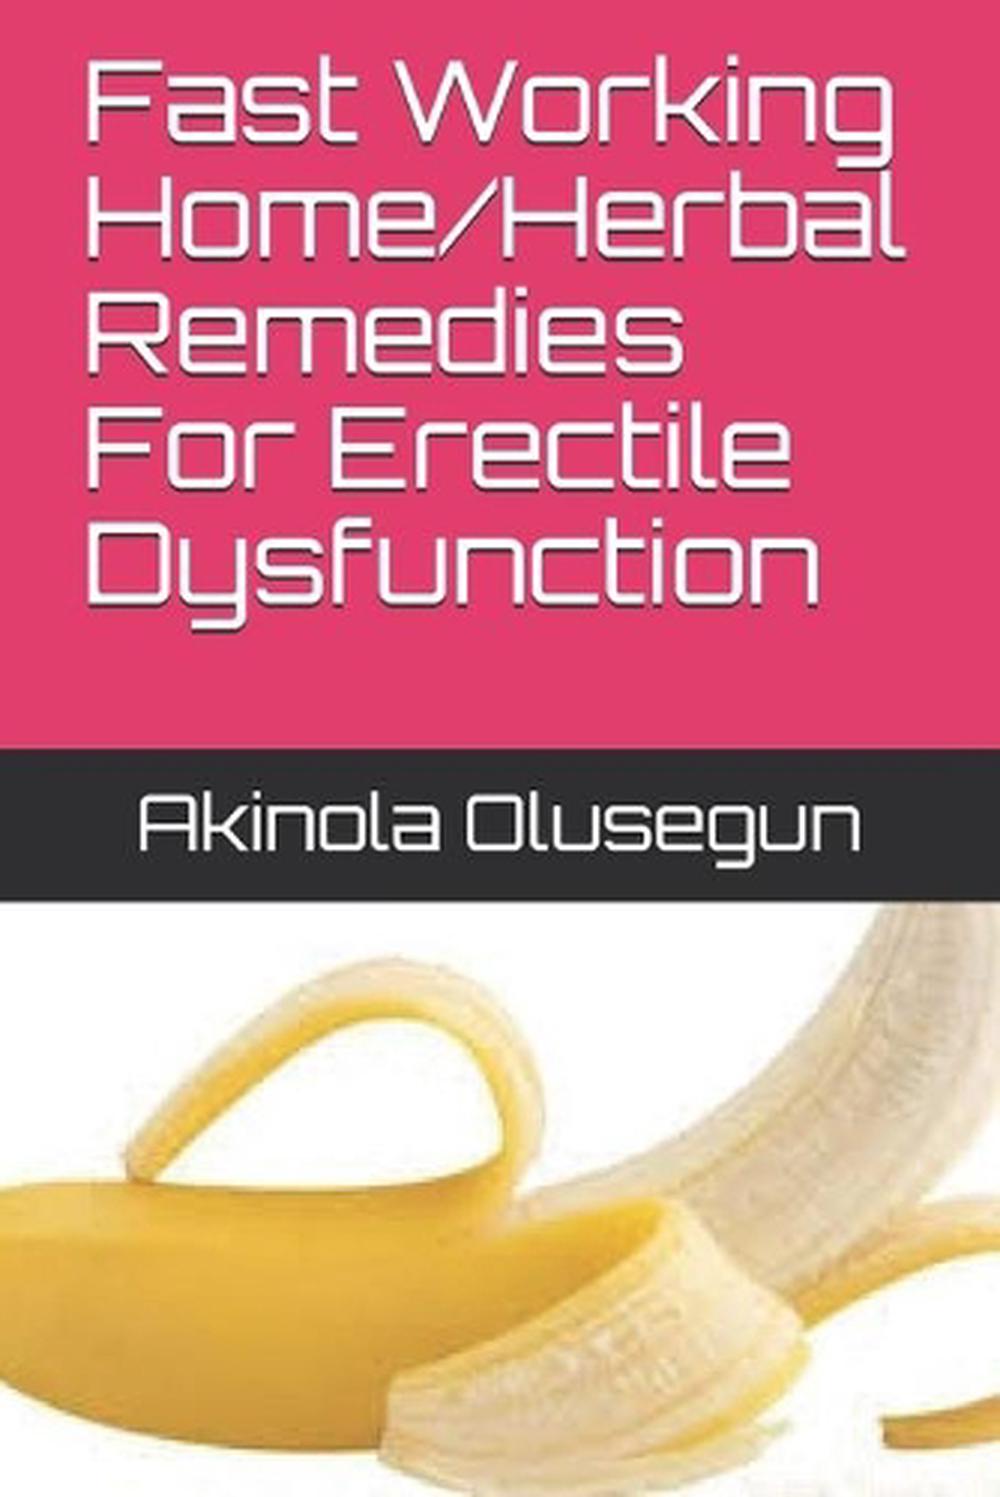 Fast Working Homeherbal Remedies For Erectile Dysfunction By Akinola 8312